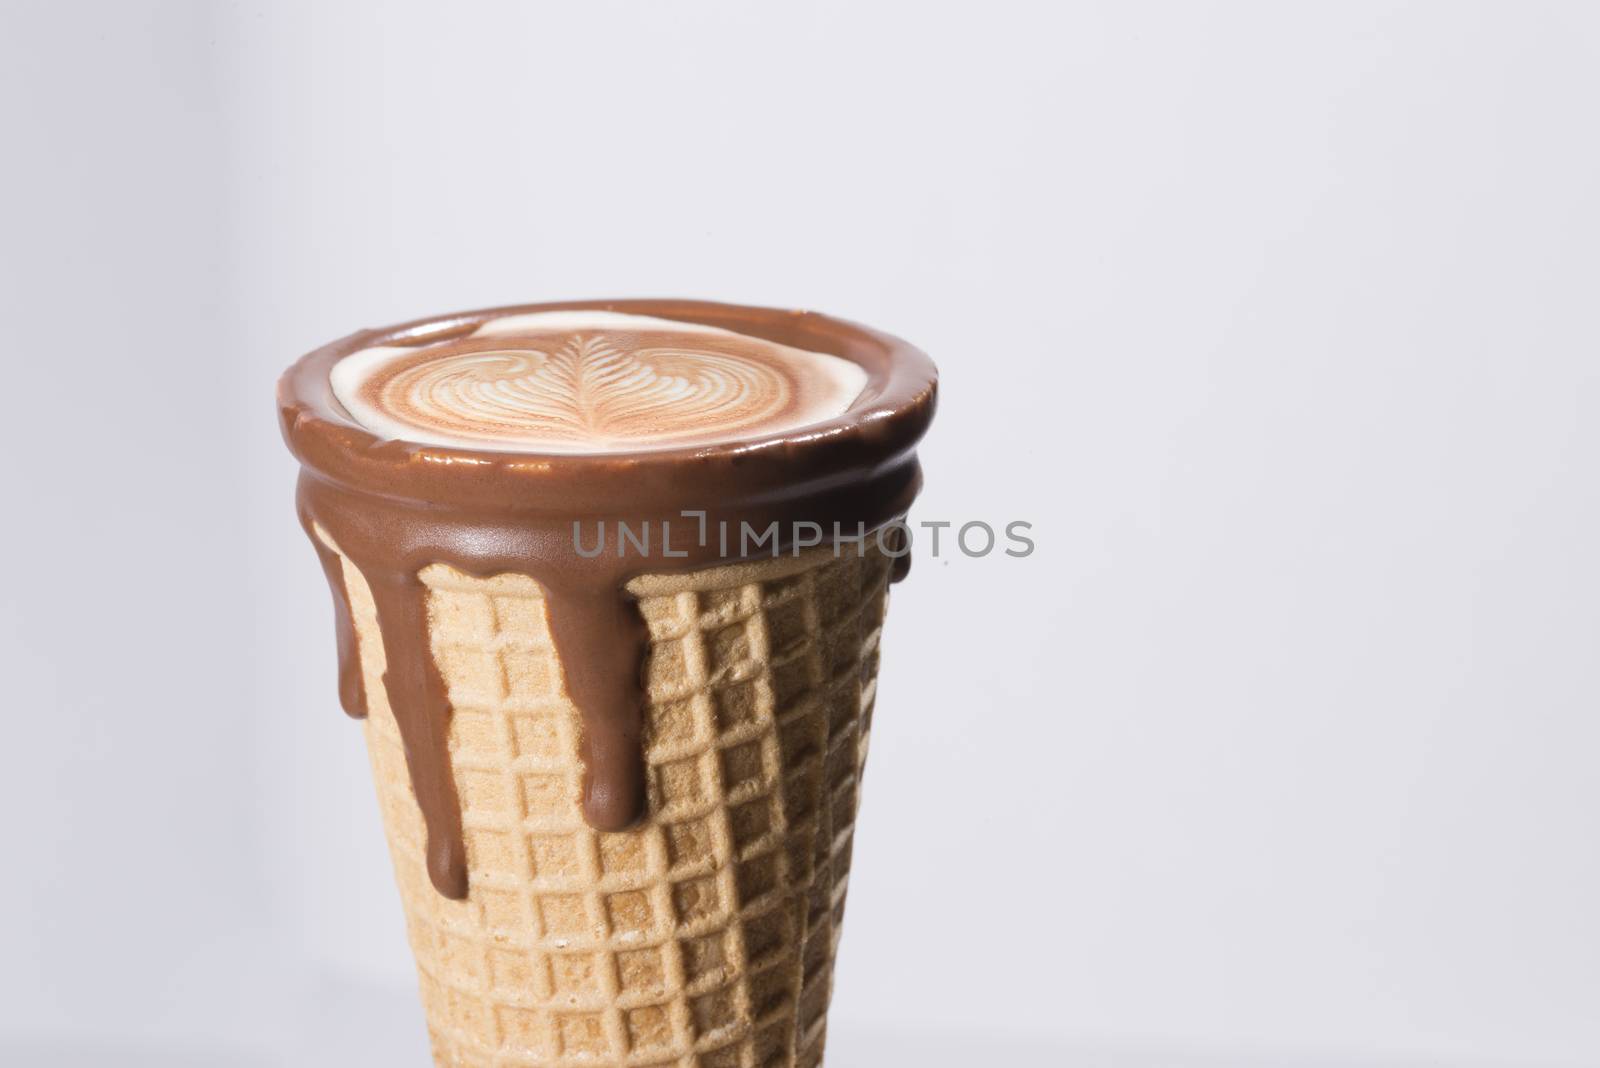 Coffee in waffle cone dipped in chocolate with drawings in capuccino / latte milk foam, latte art, isolated